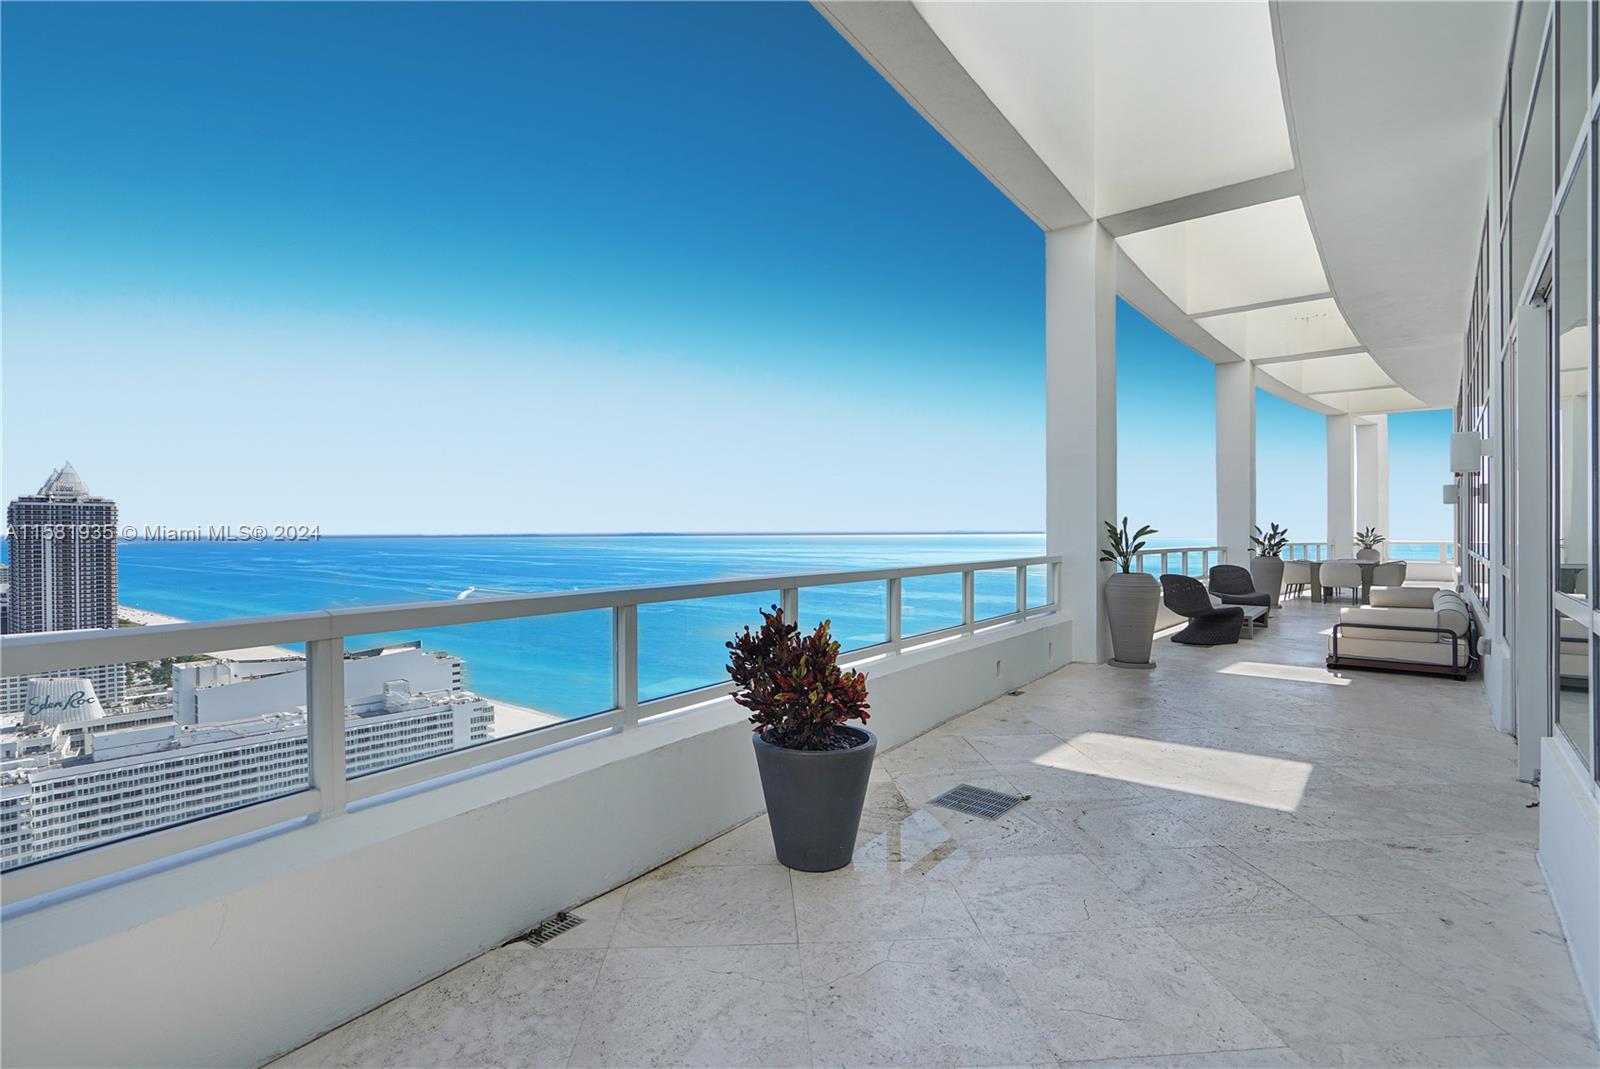 Enjoy the ultimate in resort-style living with this spectacular, turnkey, 5BD/5BA + 2 half bath penthouse encompassing the entire north side of the 37th floor at the iconic Fontainebleau II. Indulge in spectacular views of the ocean, bay & Miami skyline from the huge 3300 SF terrace with private pool & shower. The great room boasts volume ceilings & soaring windows, inviting natural light and beauty indoors. Keep your yacht at the Marina across the street on the Intracoastal. The Fontainebleau Resort offers amenities on 22 oceanfront acres including award-winning restaurants, LIV night club, Lapis spa & fitness center. Option to enroll in the hotel rental program and receive income while not using. The maintenance fee includes all utilities, valet and free breakfast in the owner’s lounge.